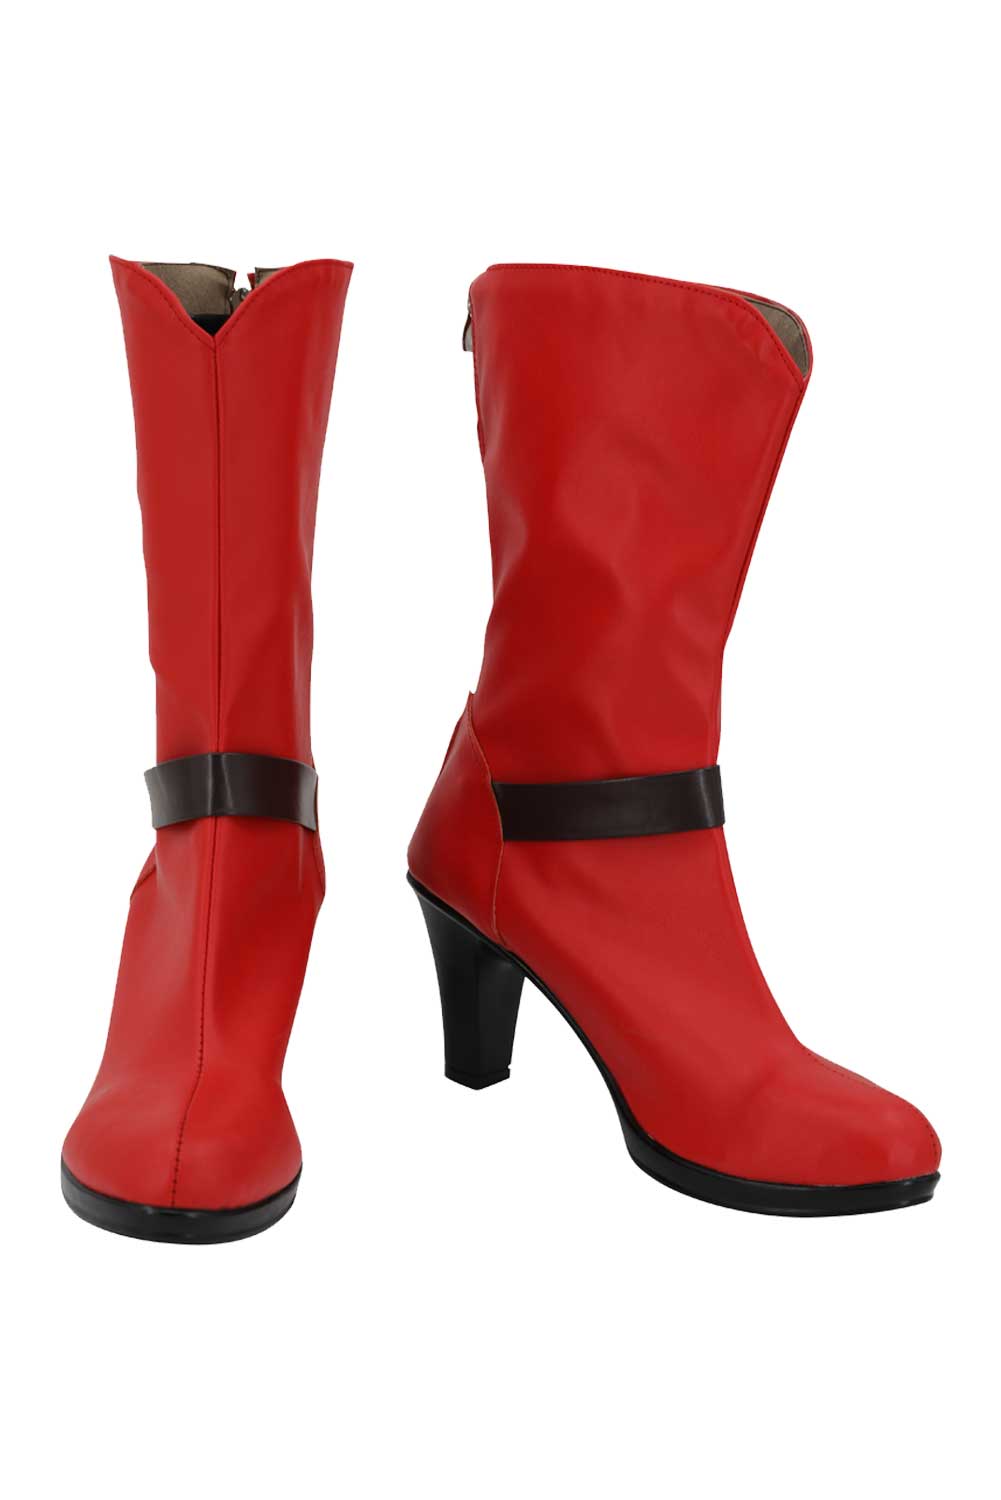 Anime One Piece Nami Cosplay Red Shoes Boots Halloween Custom Made Costumes Accessory 